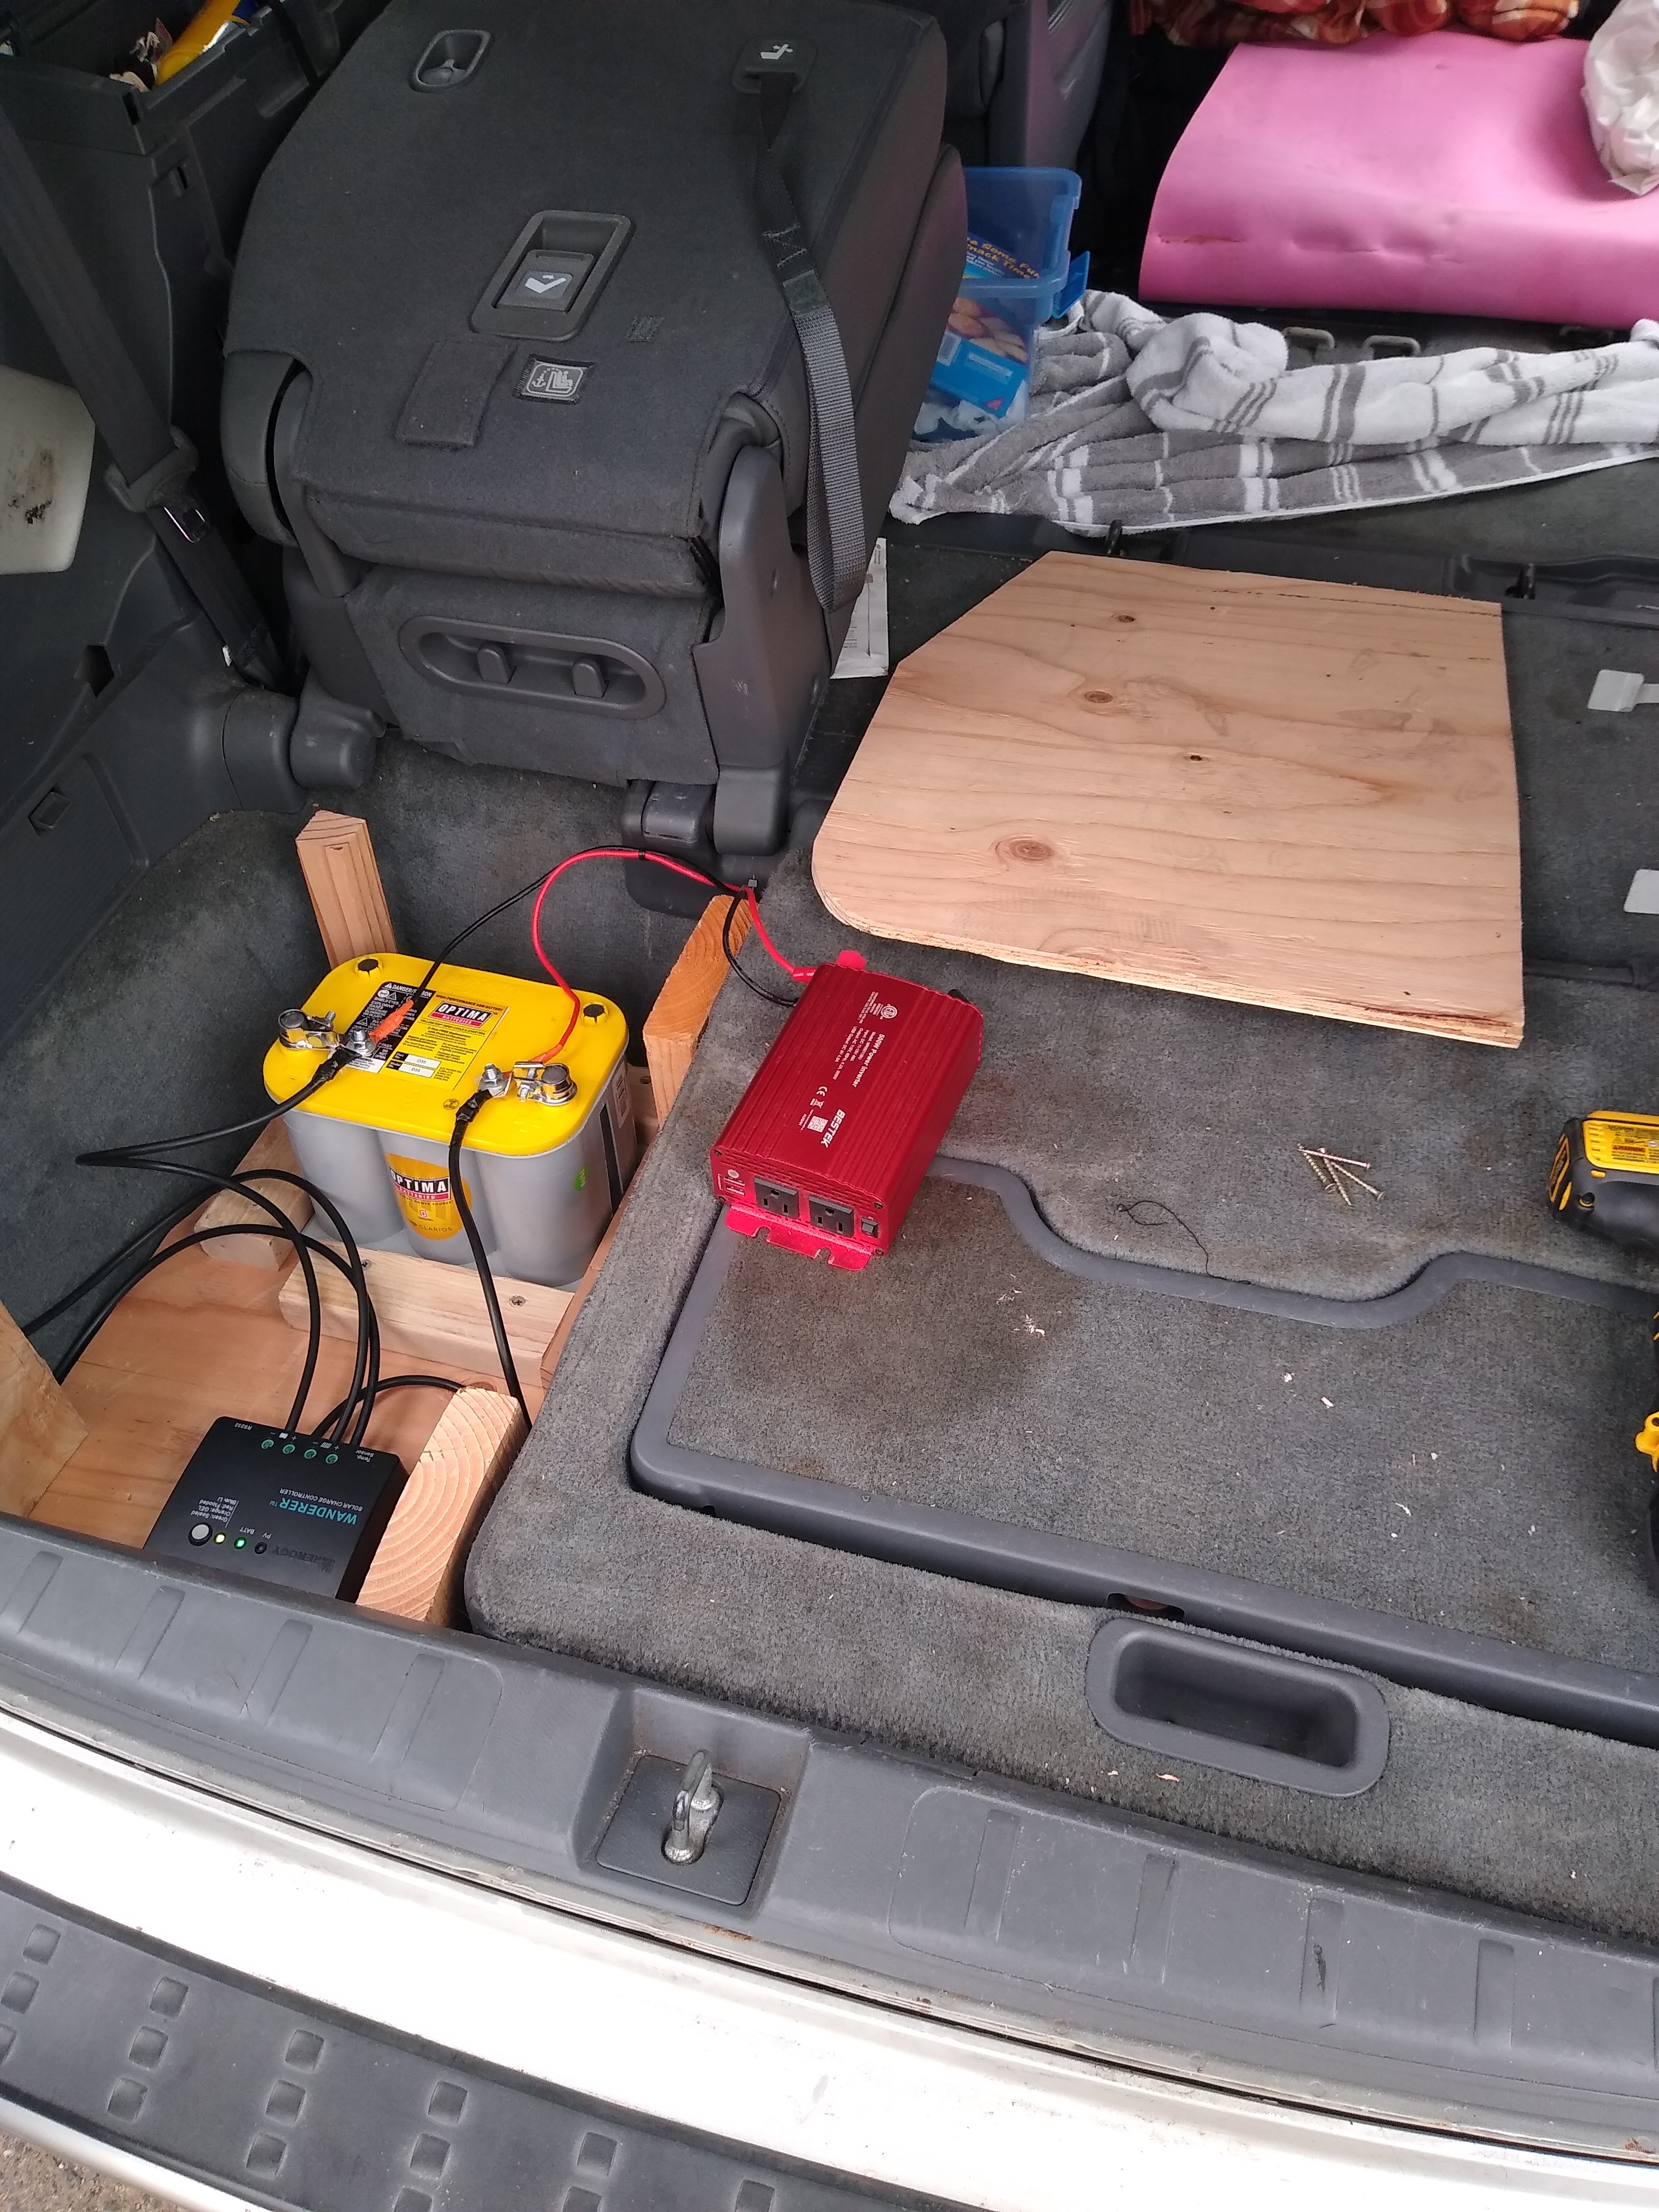 Battery, Controller, and Power Inverter